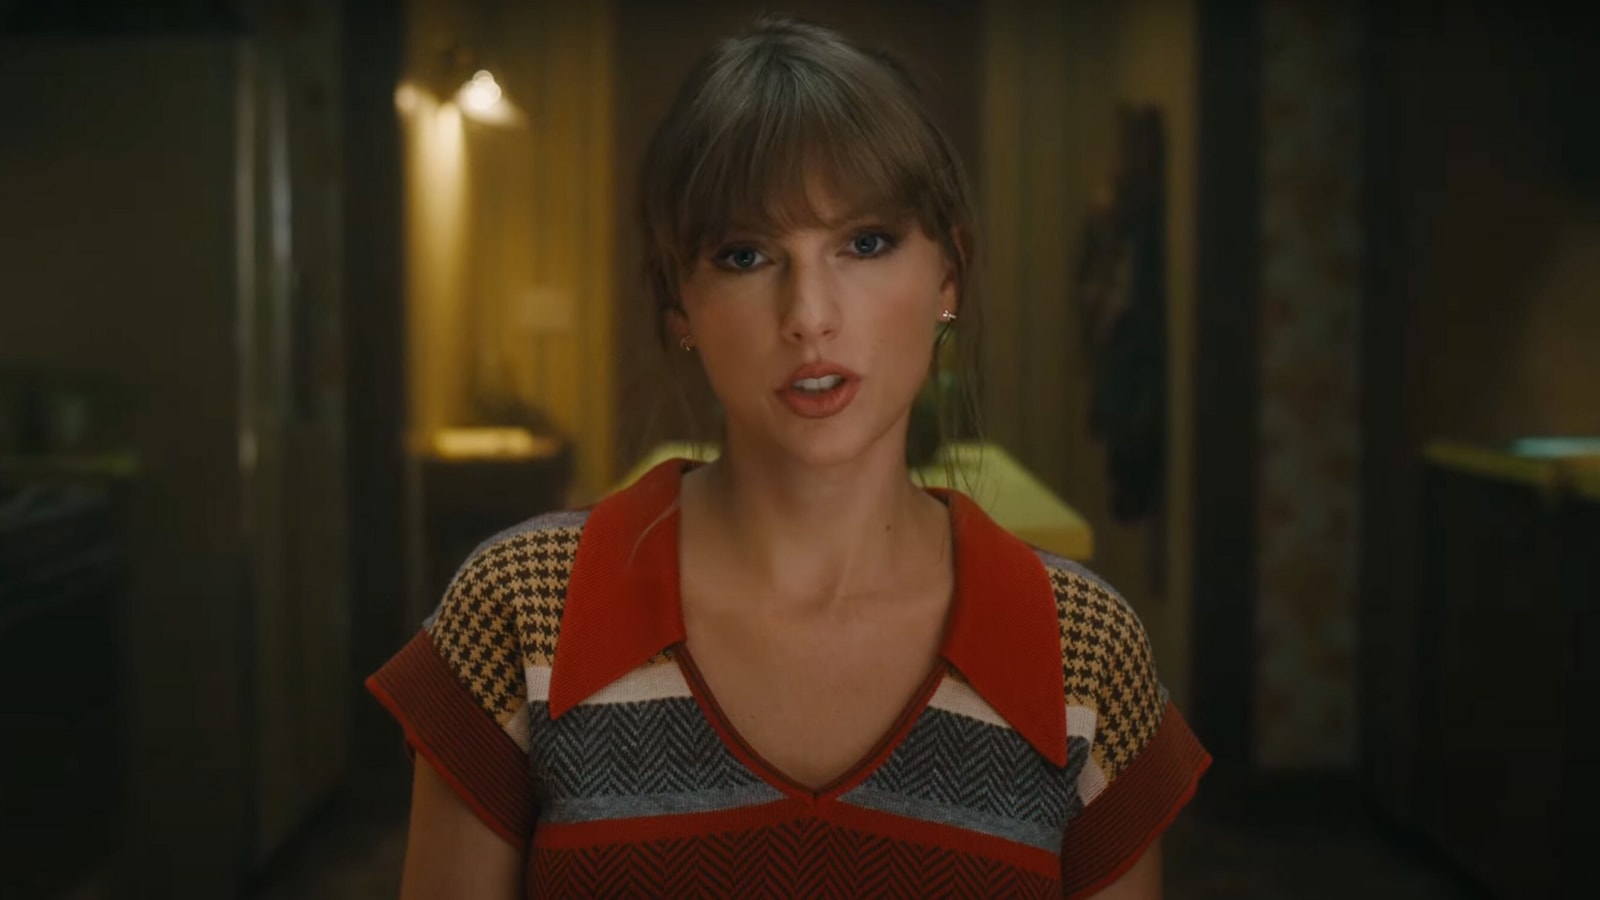 taylor-swift-releases-new-album-midnights-music-video-for-anti-hero-watch